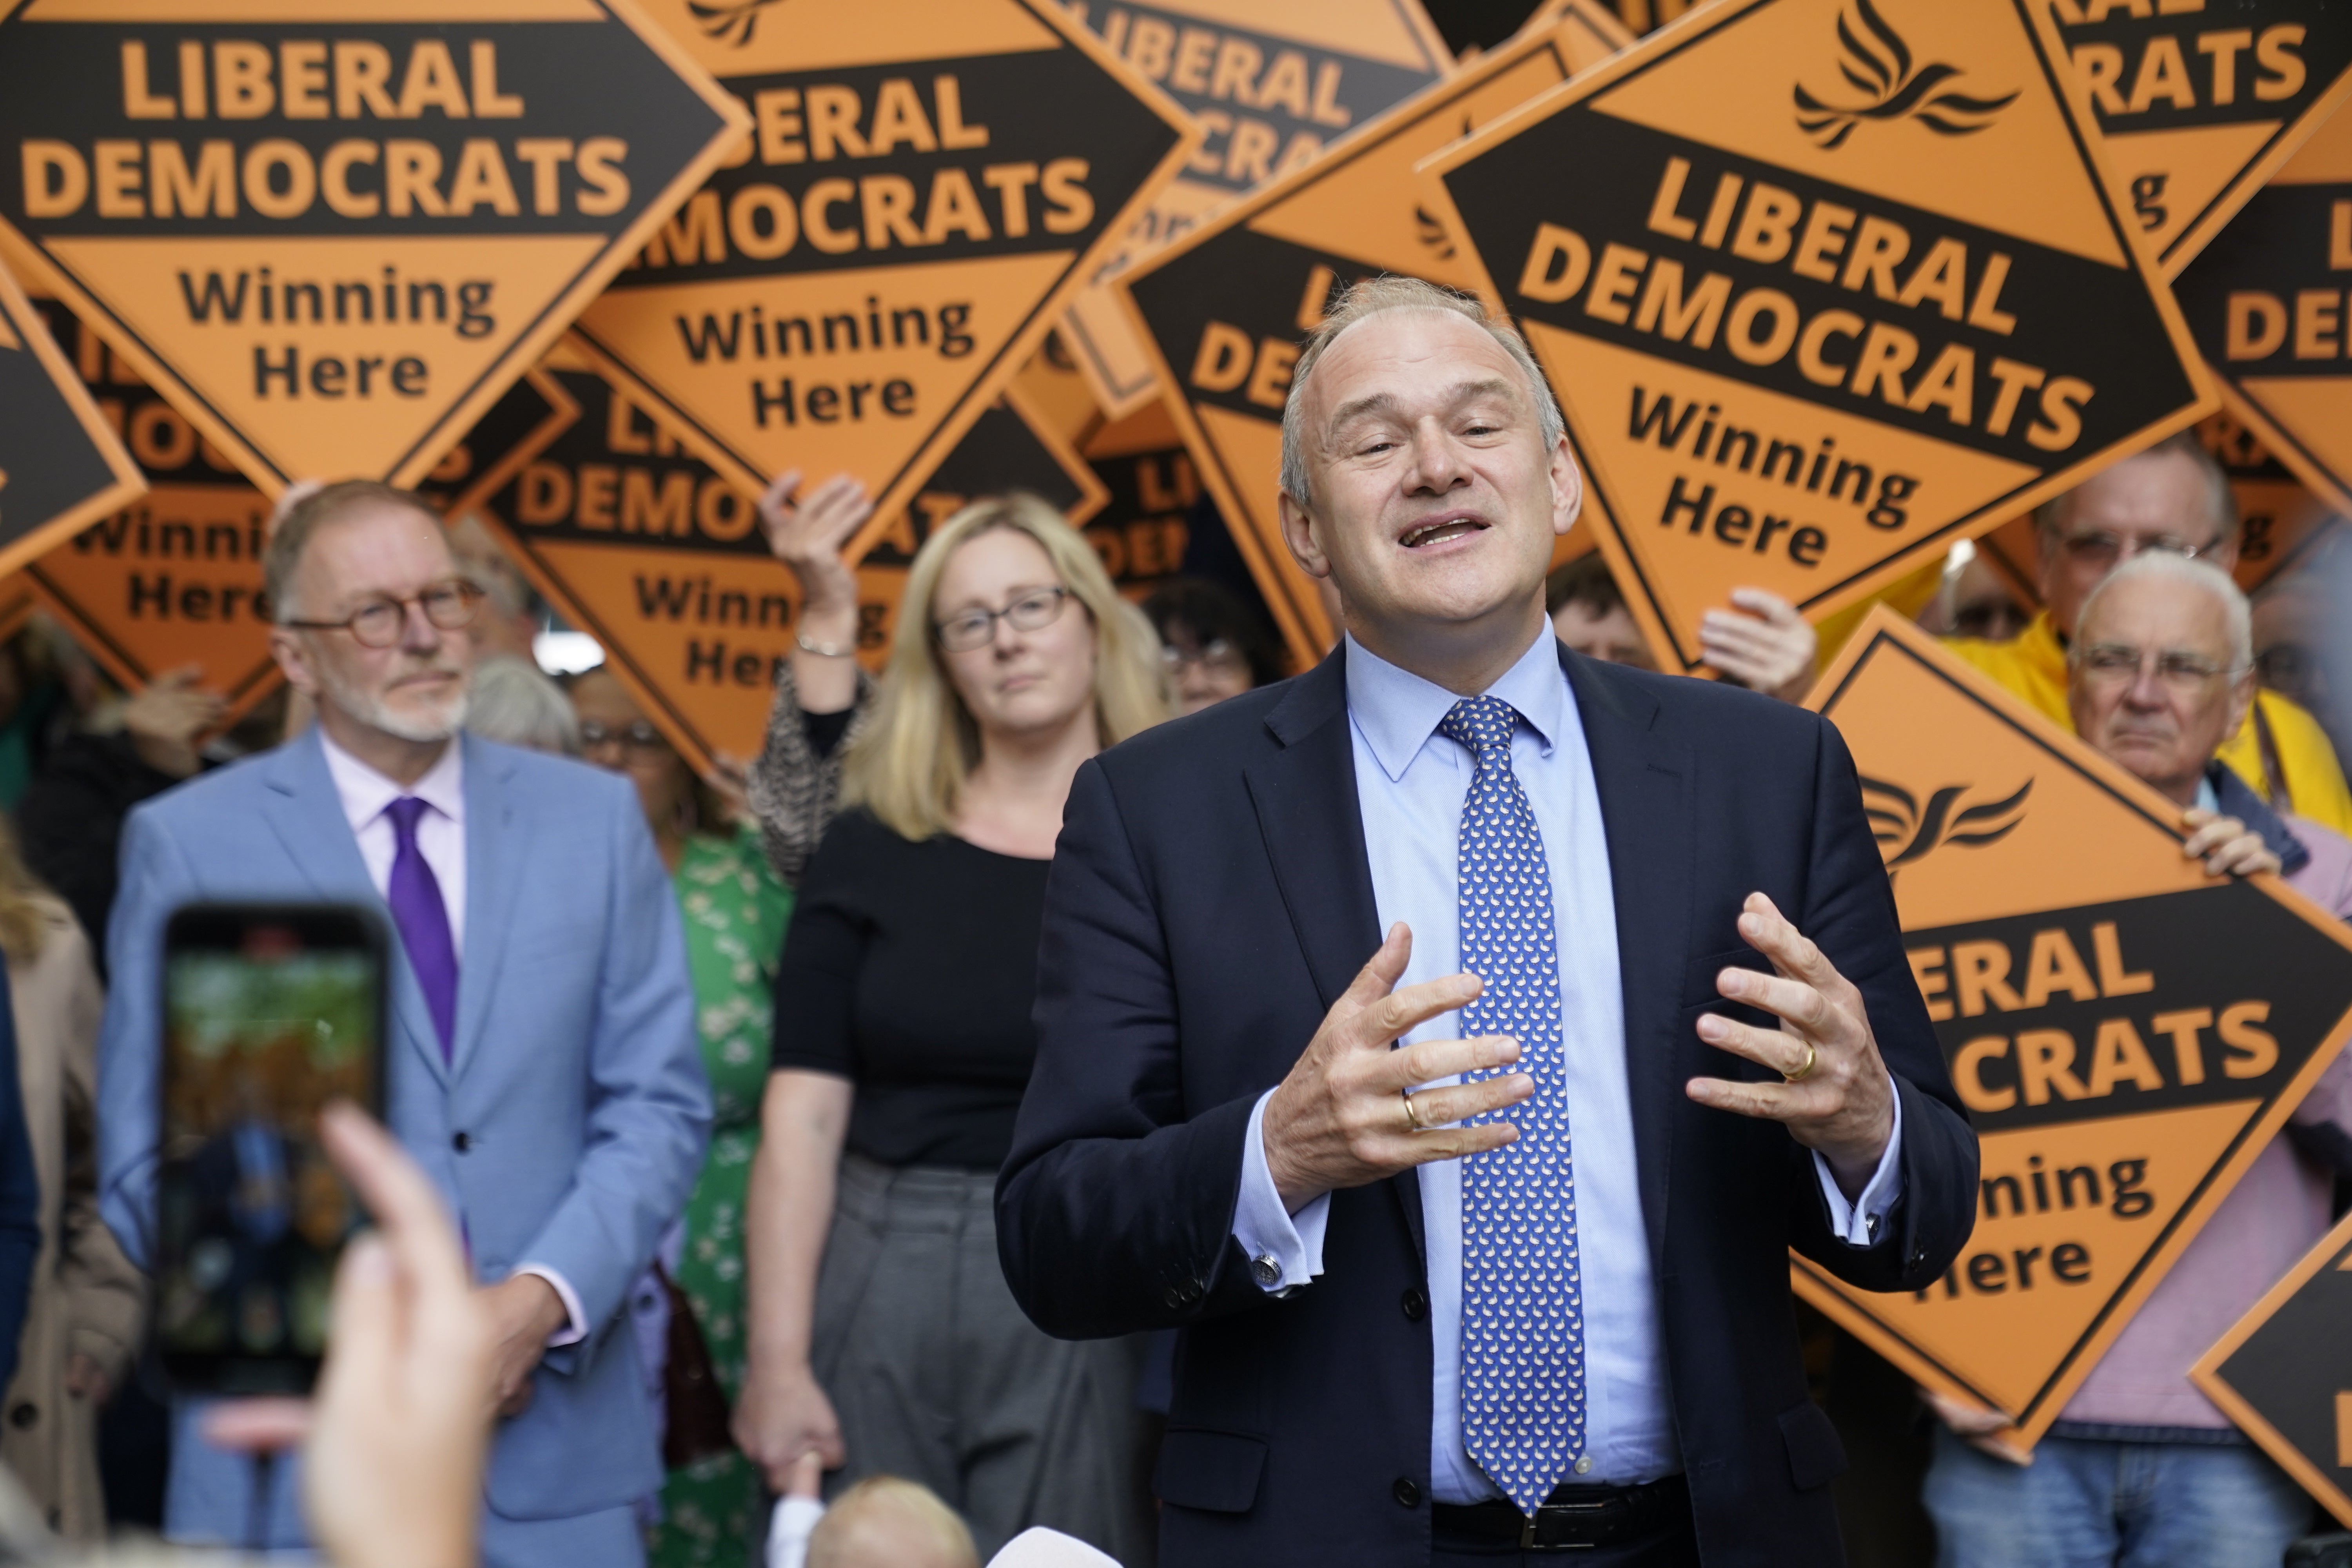 Liberal Democrat leader Sir Ed Davey speaking during a visit to the town centre in Cheltenham, Gloucestershire